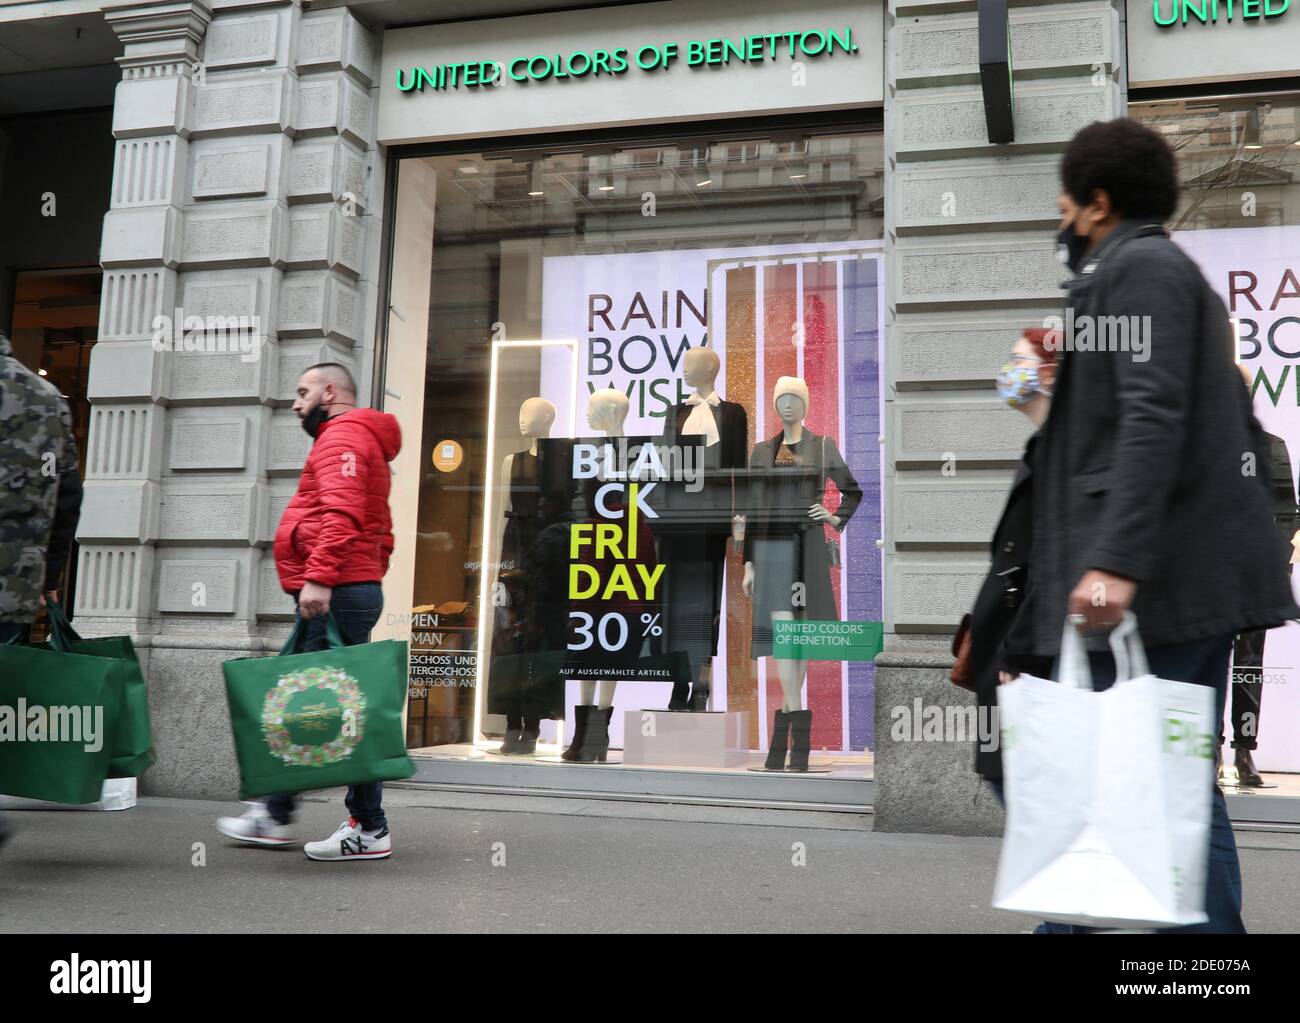 Shoppers walk past a poster offering special discount on Black Friday sales  at a United Colors of Benetton store, as the spread of the coronavirus  disease (COVID-19) continues, in Zurich, Switzerland November